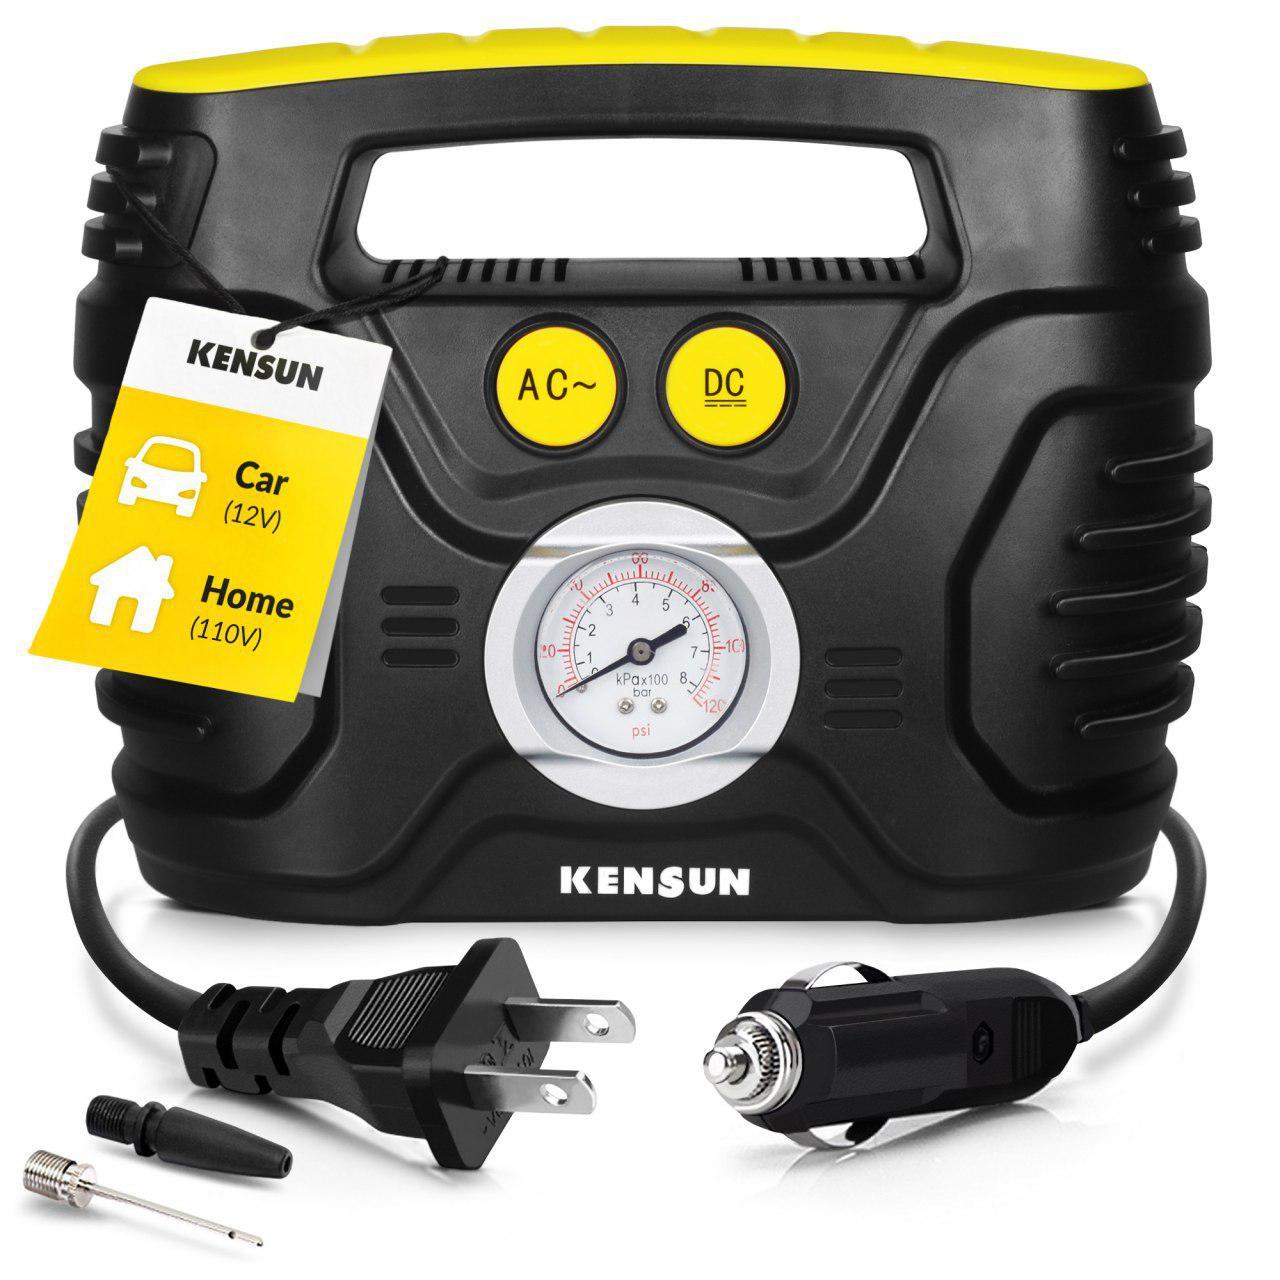 Kensun Portable Tire inflator with Analogue Pressure Gauge Home & Car